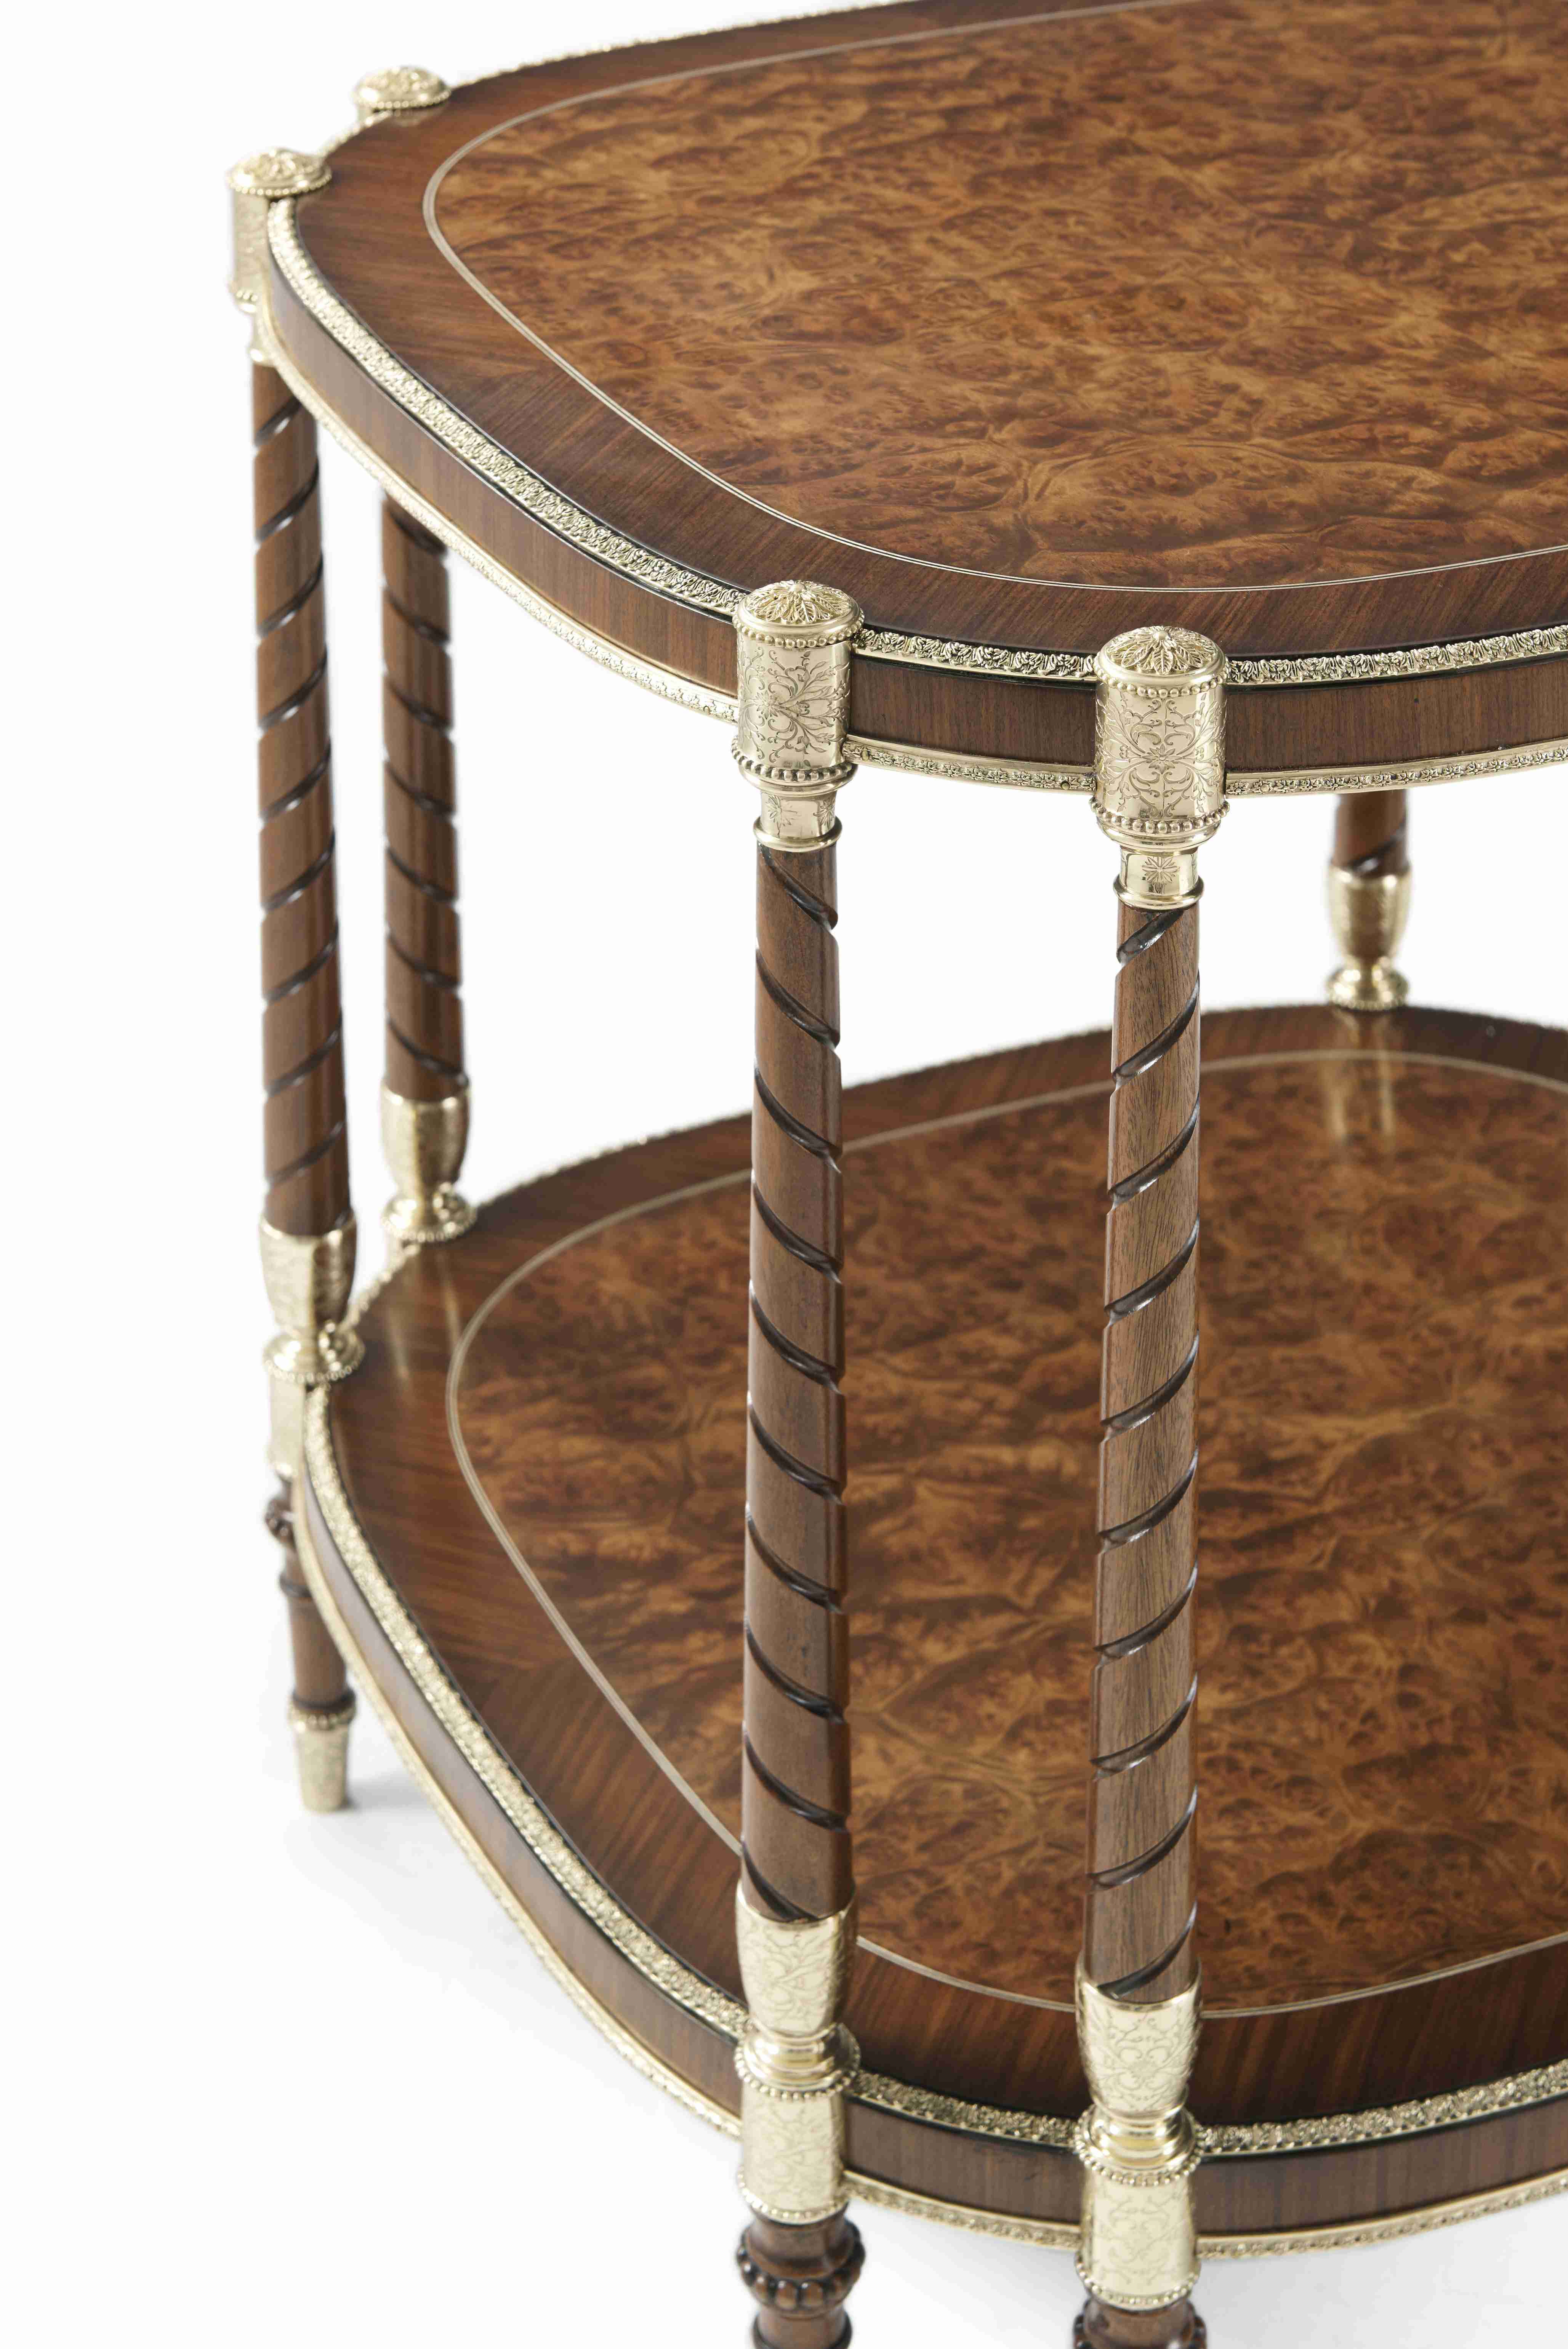 THE TIMOTHY SIDE TABLE